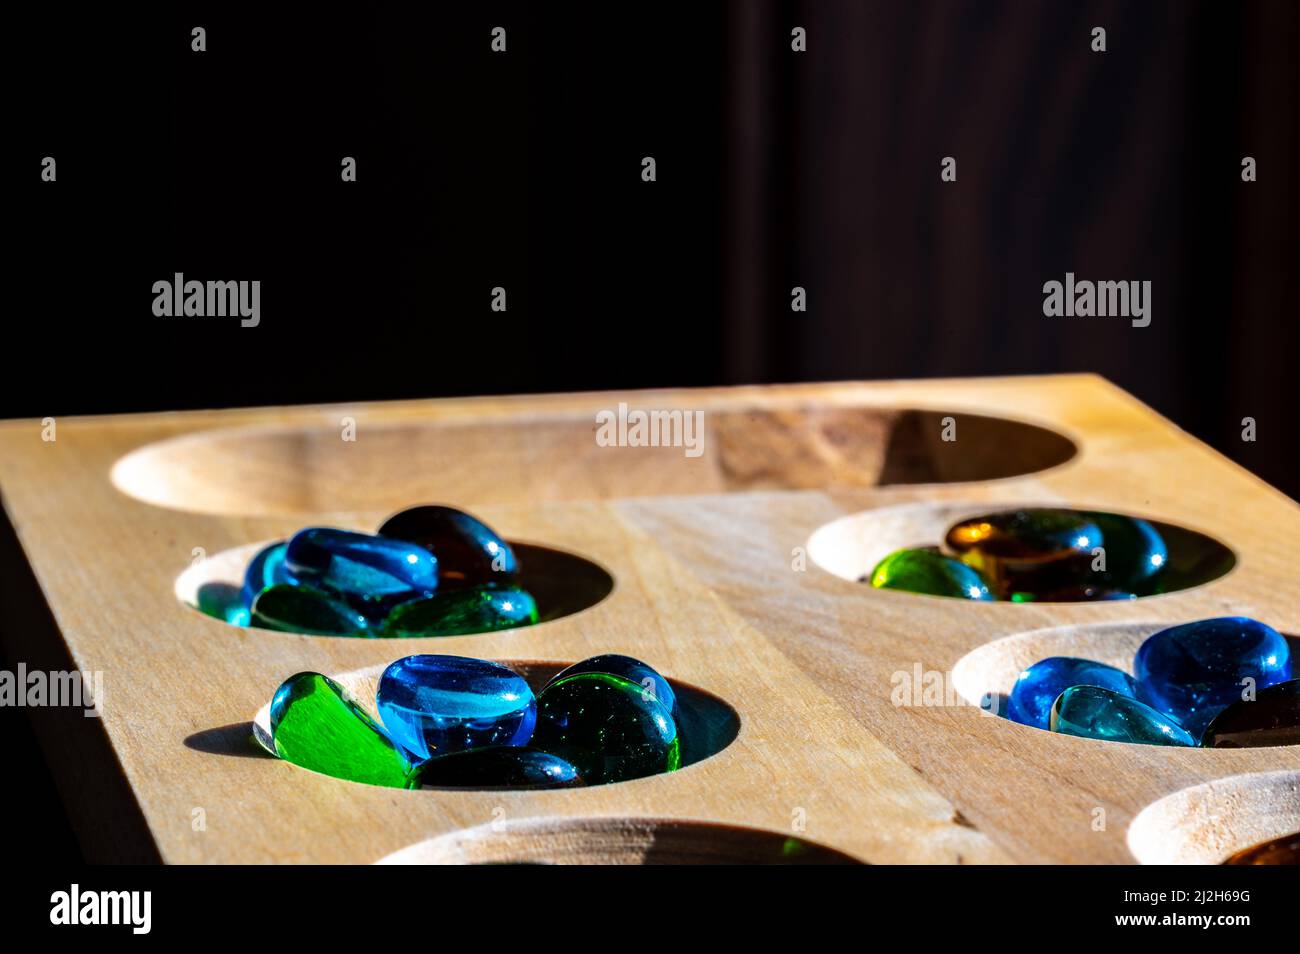 Selective focus on glass beads on a wooden mancala board Stock Photo